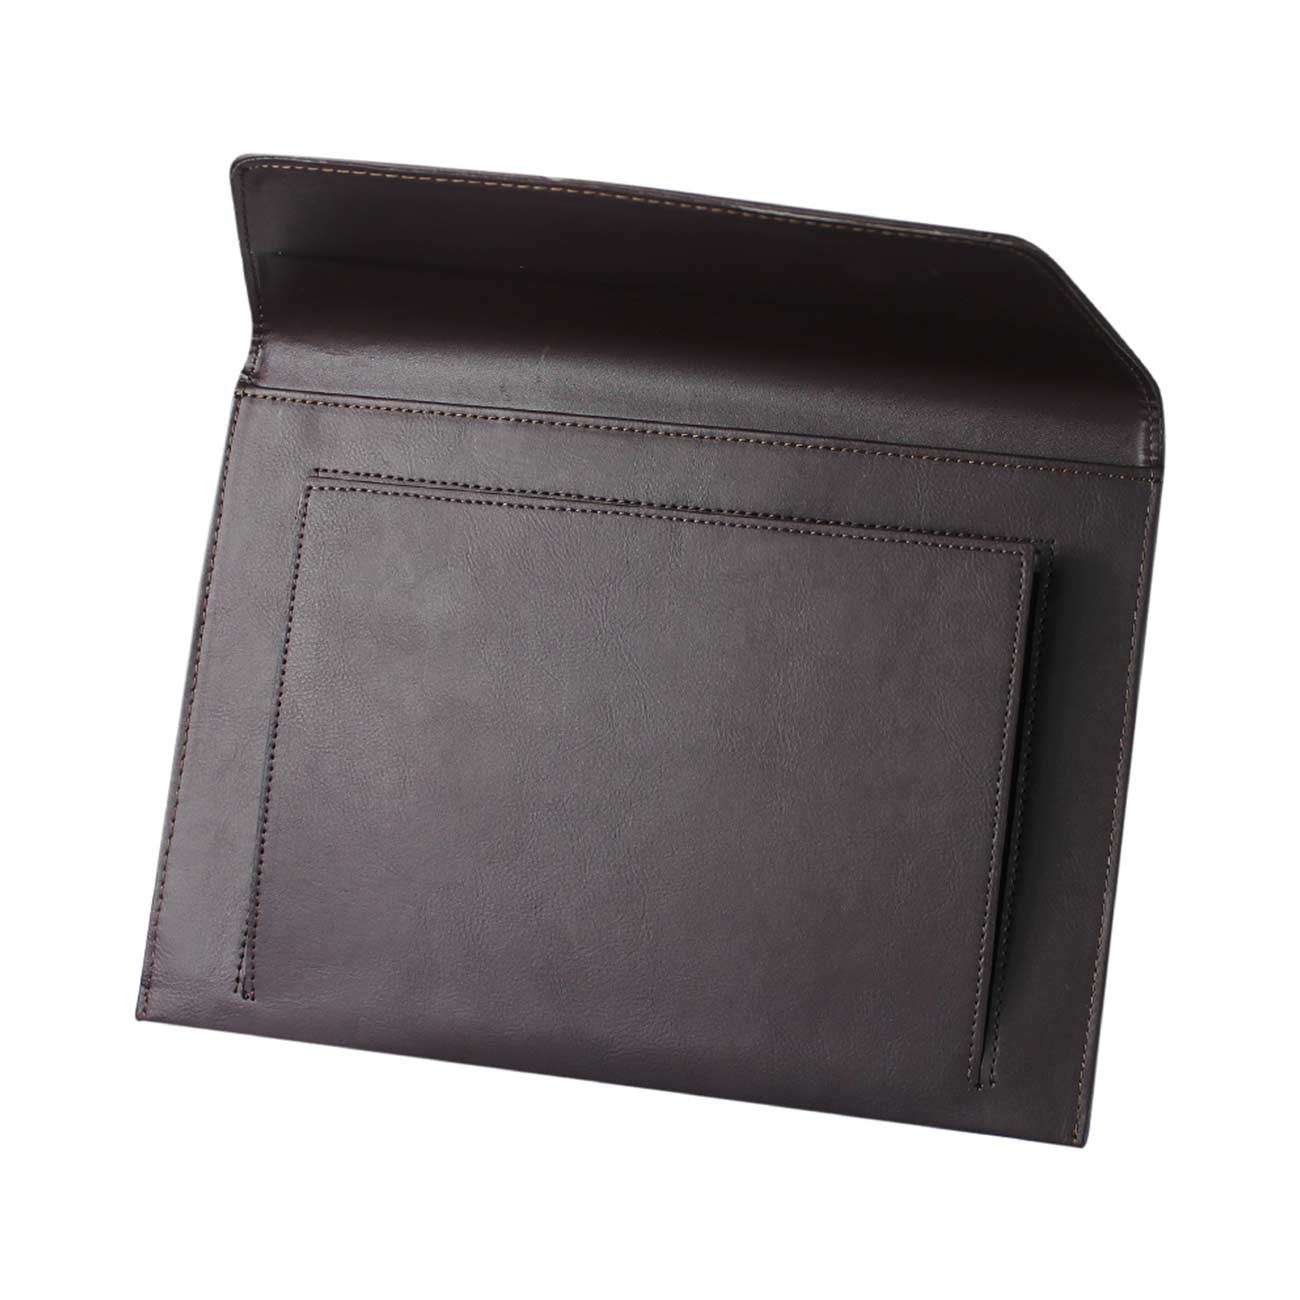 REIKO PREMIUM LEATHER CASE POUCH FOR 8.2INCHES IPADS AND TABLETS In BROWN